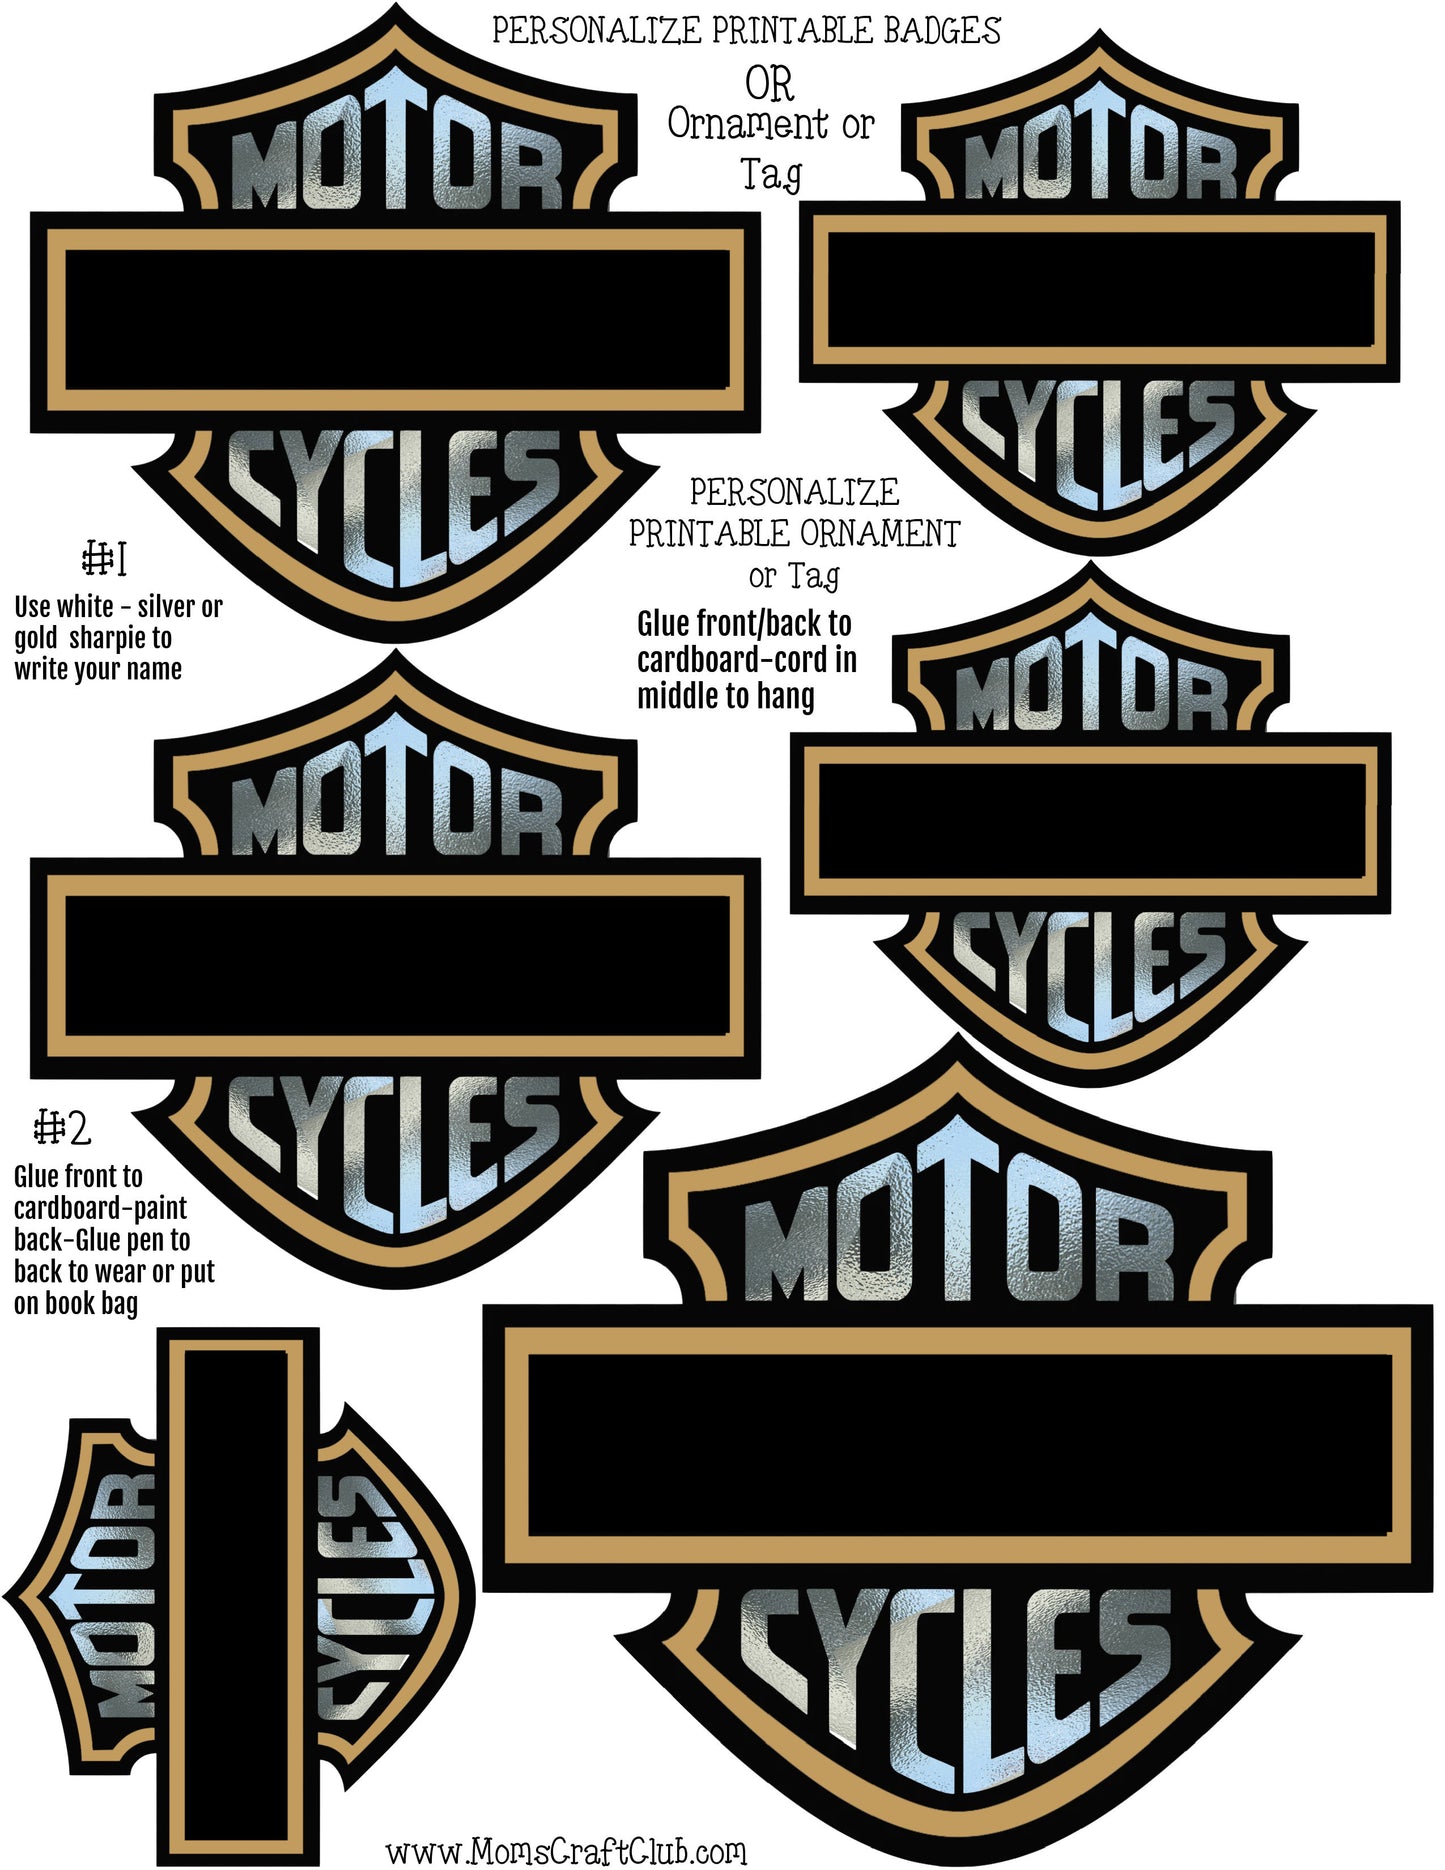 Motorcycle Personalize badges - Tags or Ornament - Gold - EASY 1 PAGE CRAFT